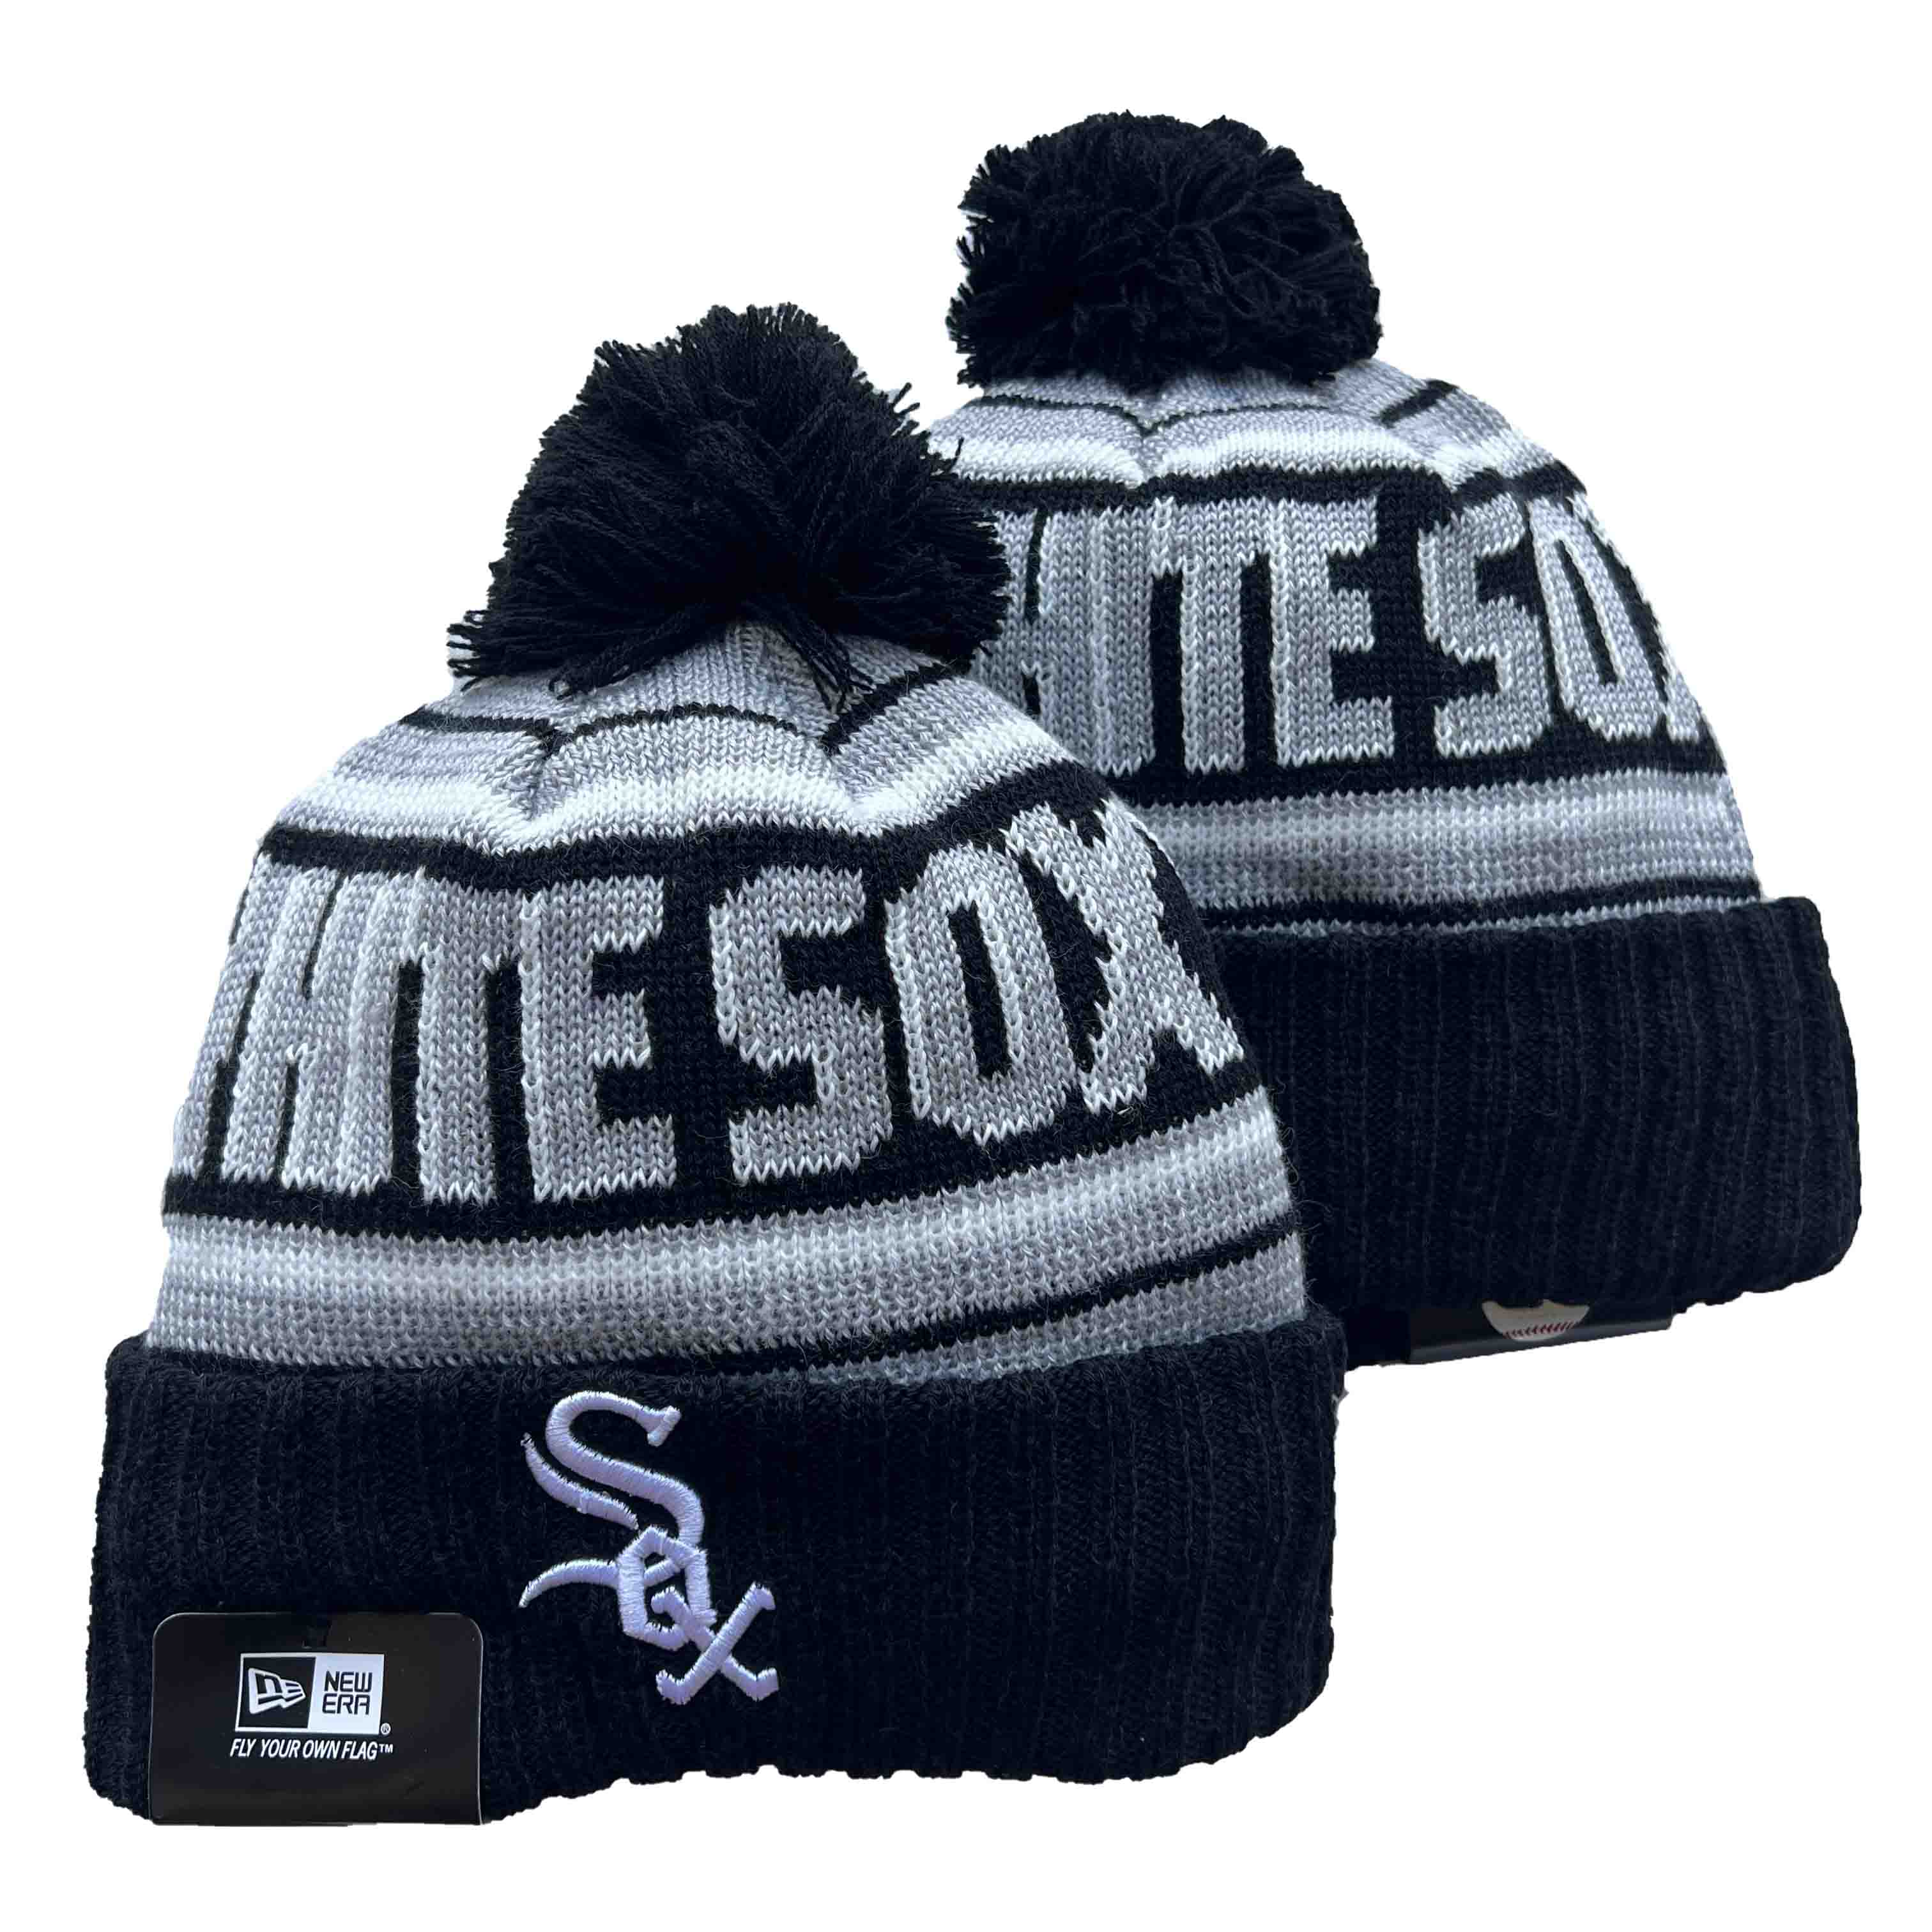 MLB Chicago White Sox Beanies Knit Hats-YD112